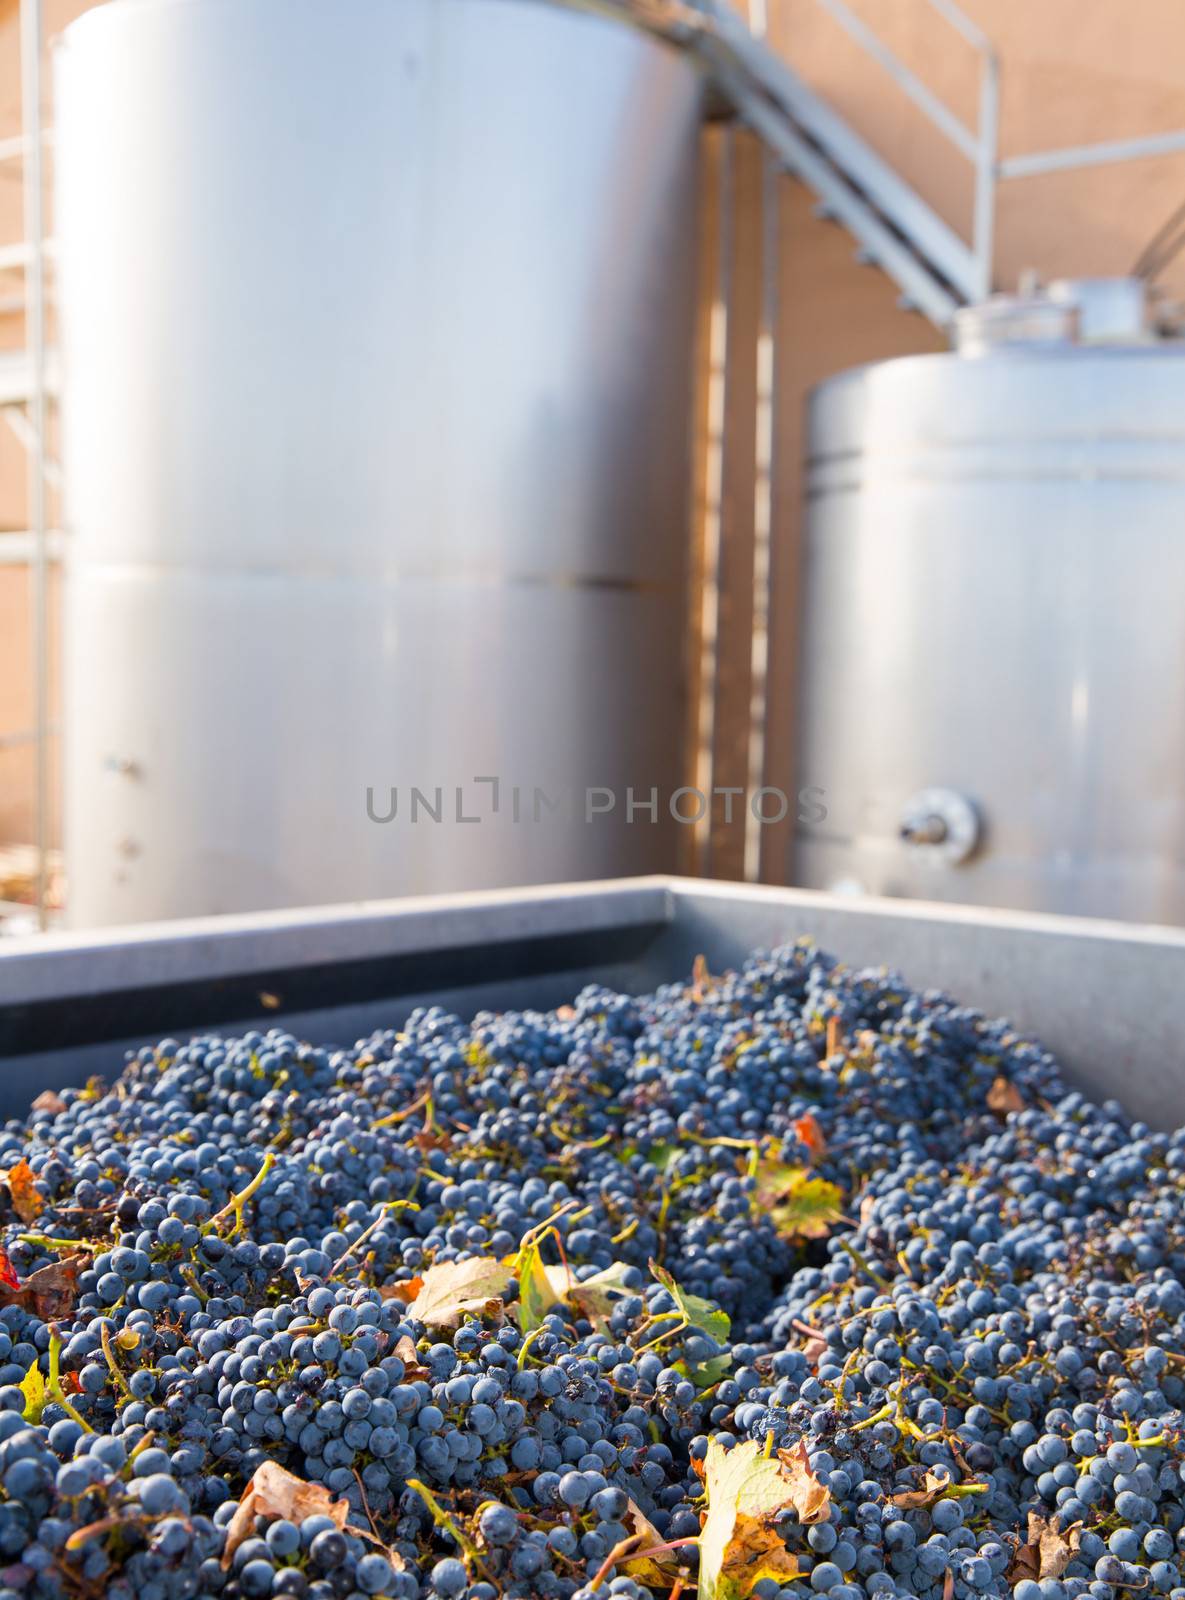 cabernet sauvignon vinemaking with grapes and tanks by lunamarina